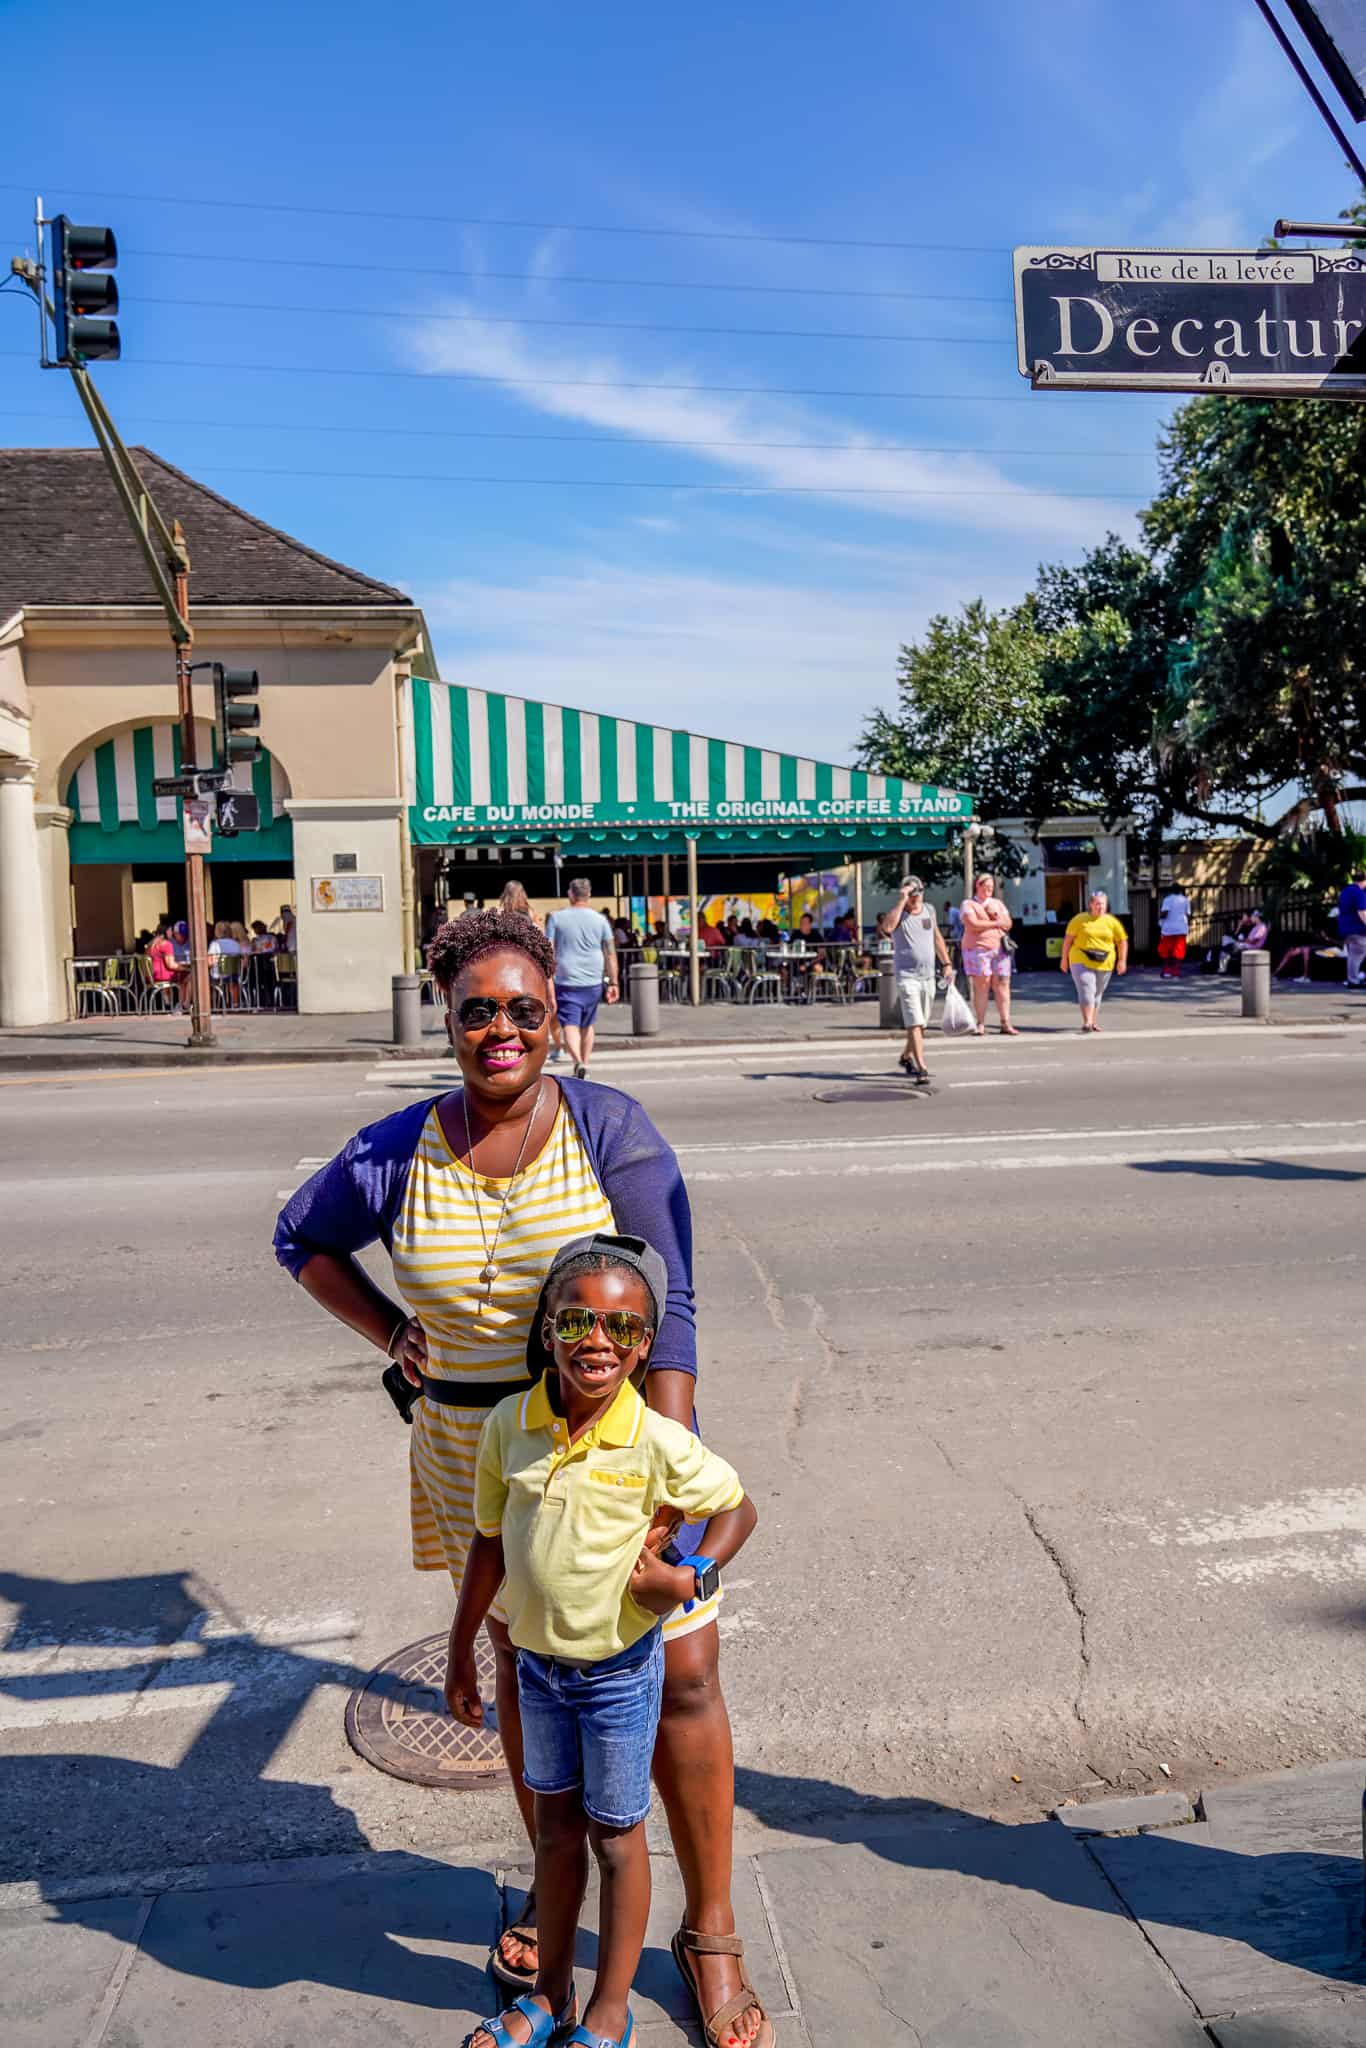 With Kids New Orleans Itinerary